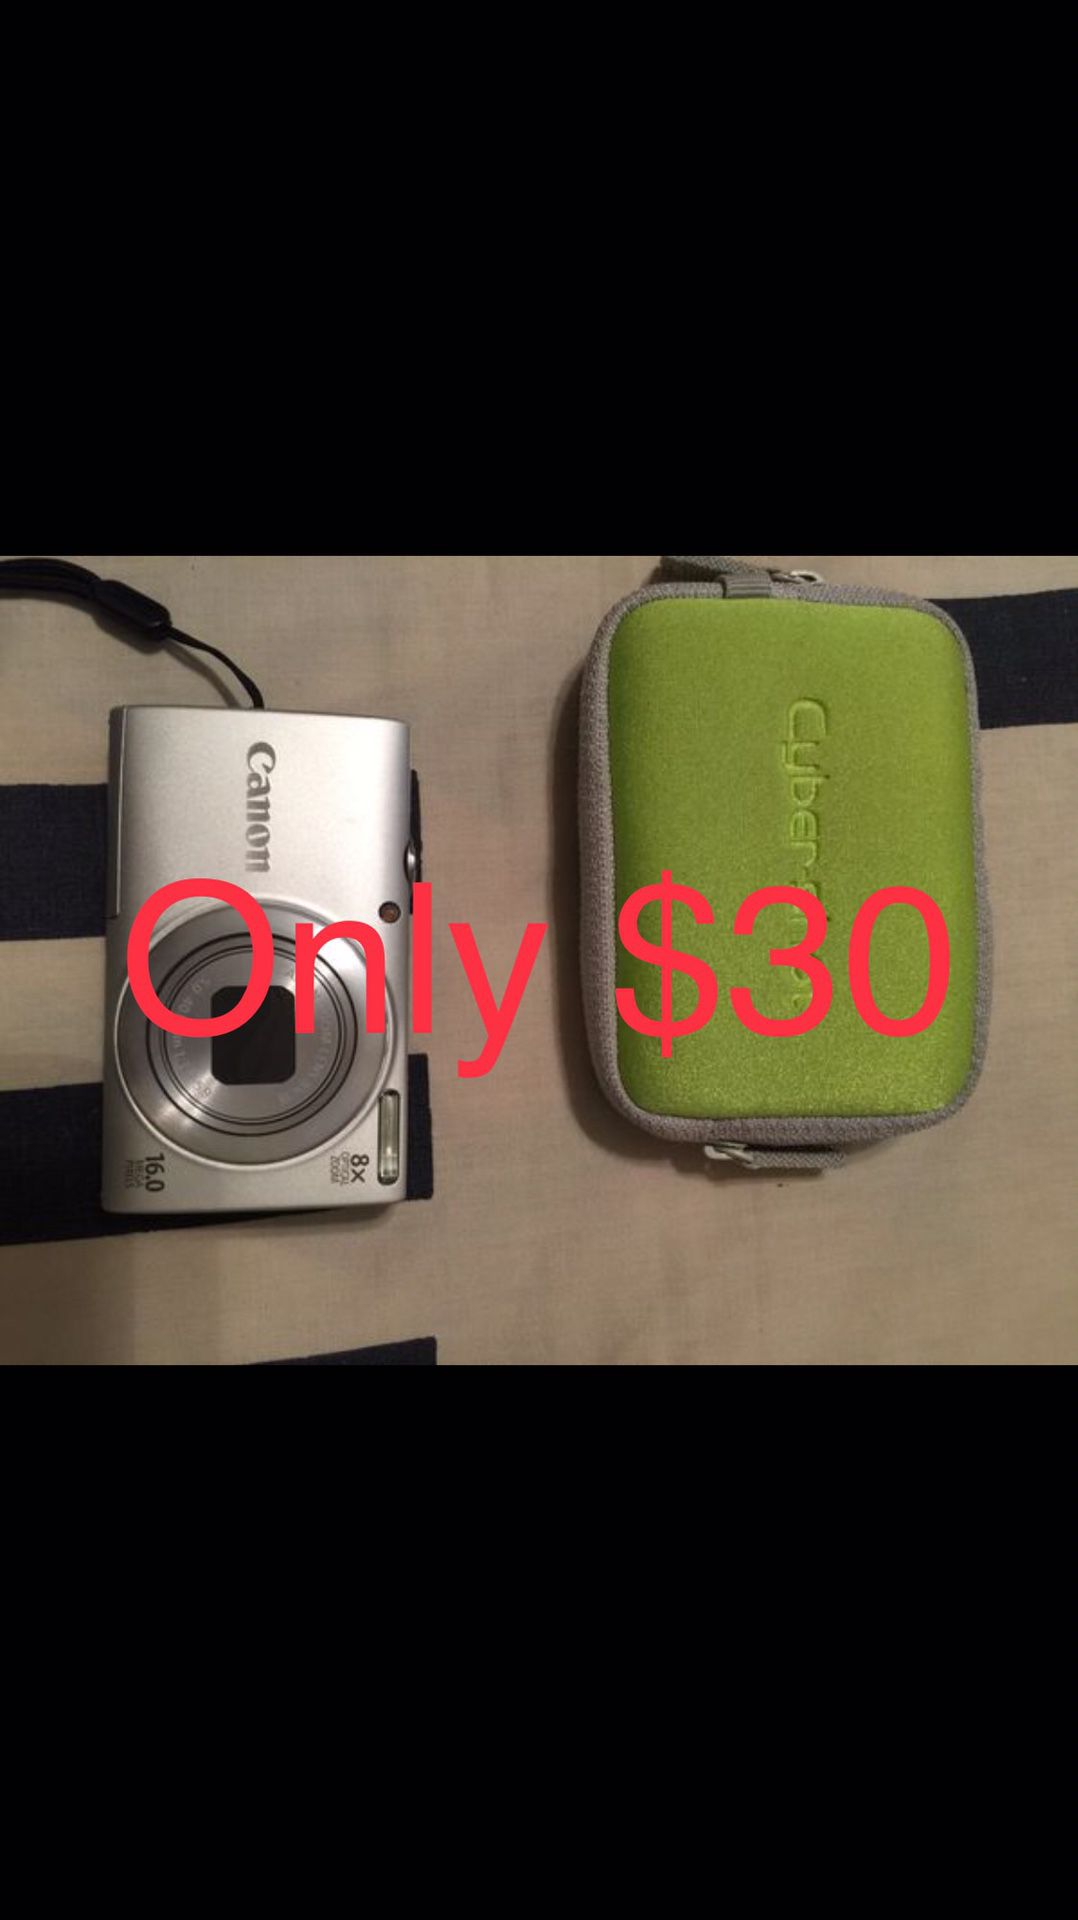 Canon Cybershot 16MP digital camera. 16GB memory card. Battery charger included. 100% working.